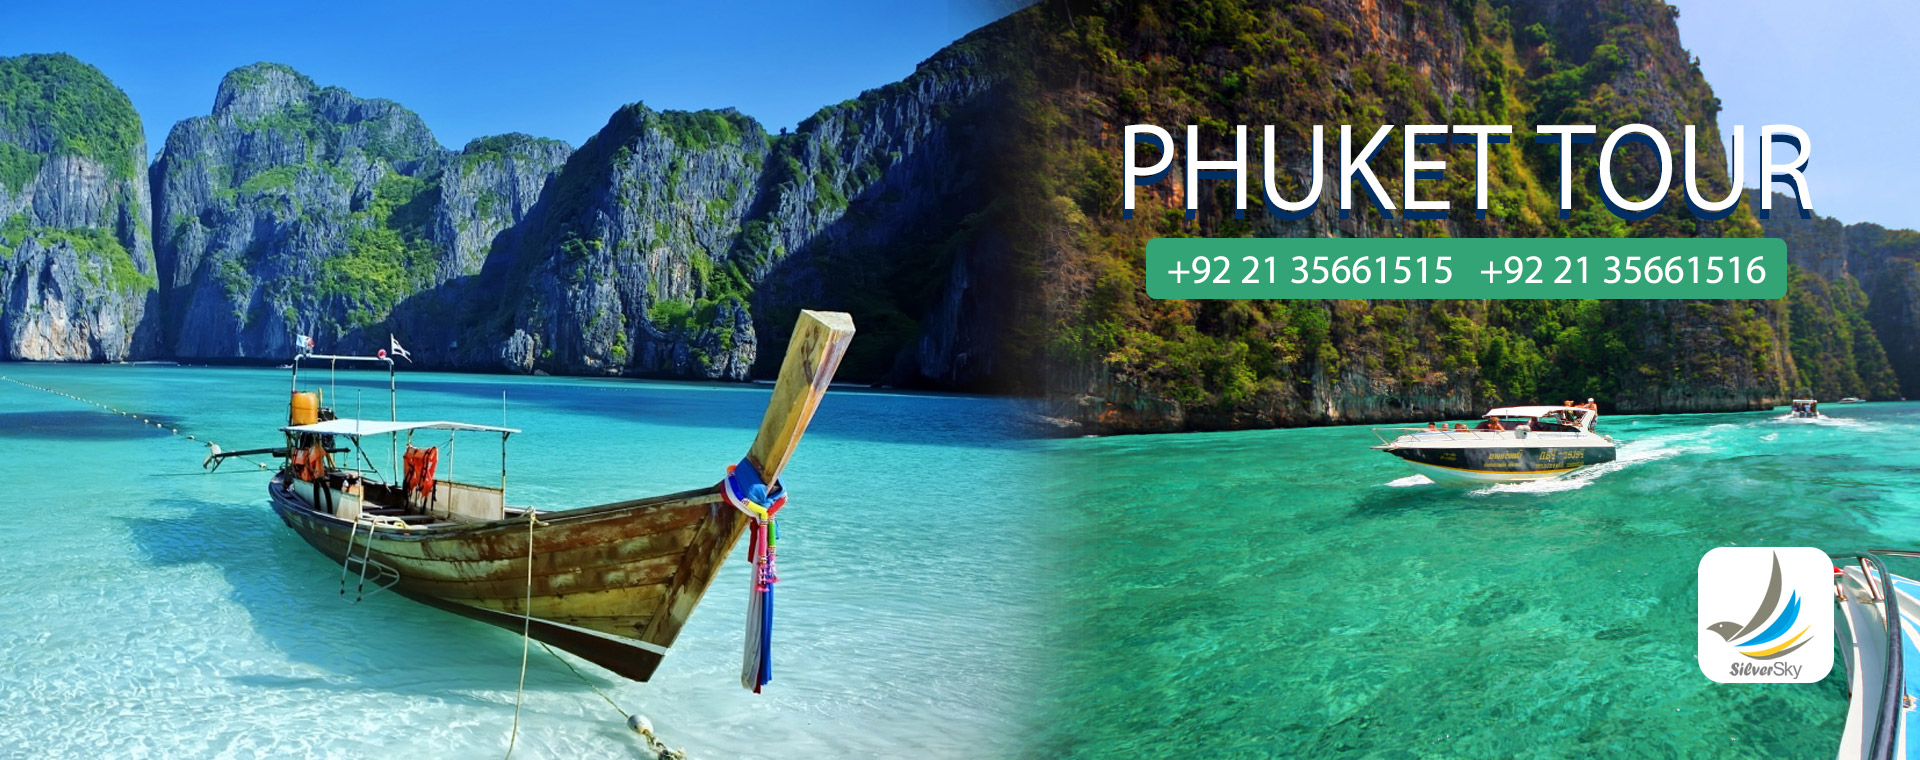 Phuket Tour by SilverSky Travel and Tourism